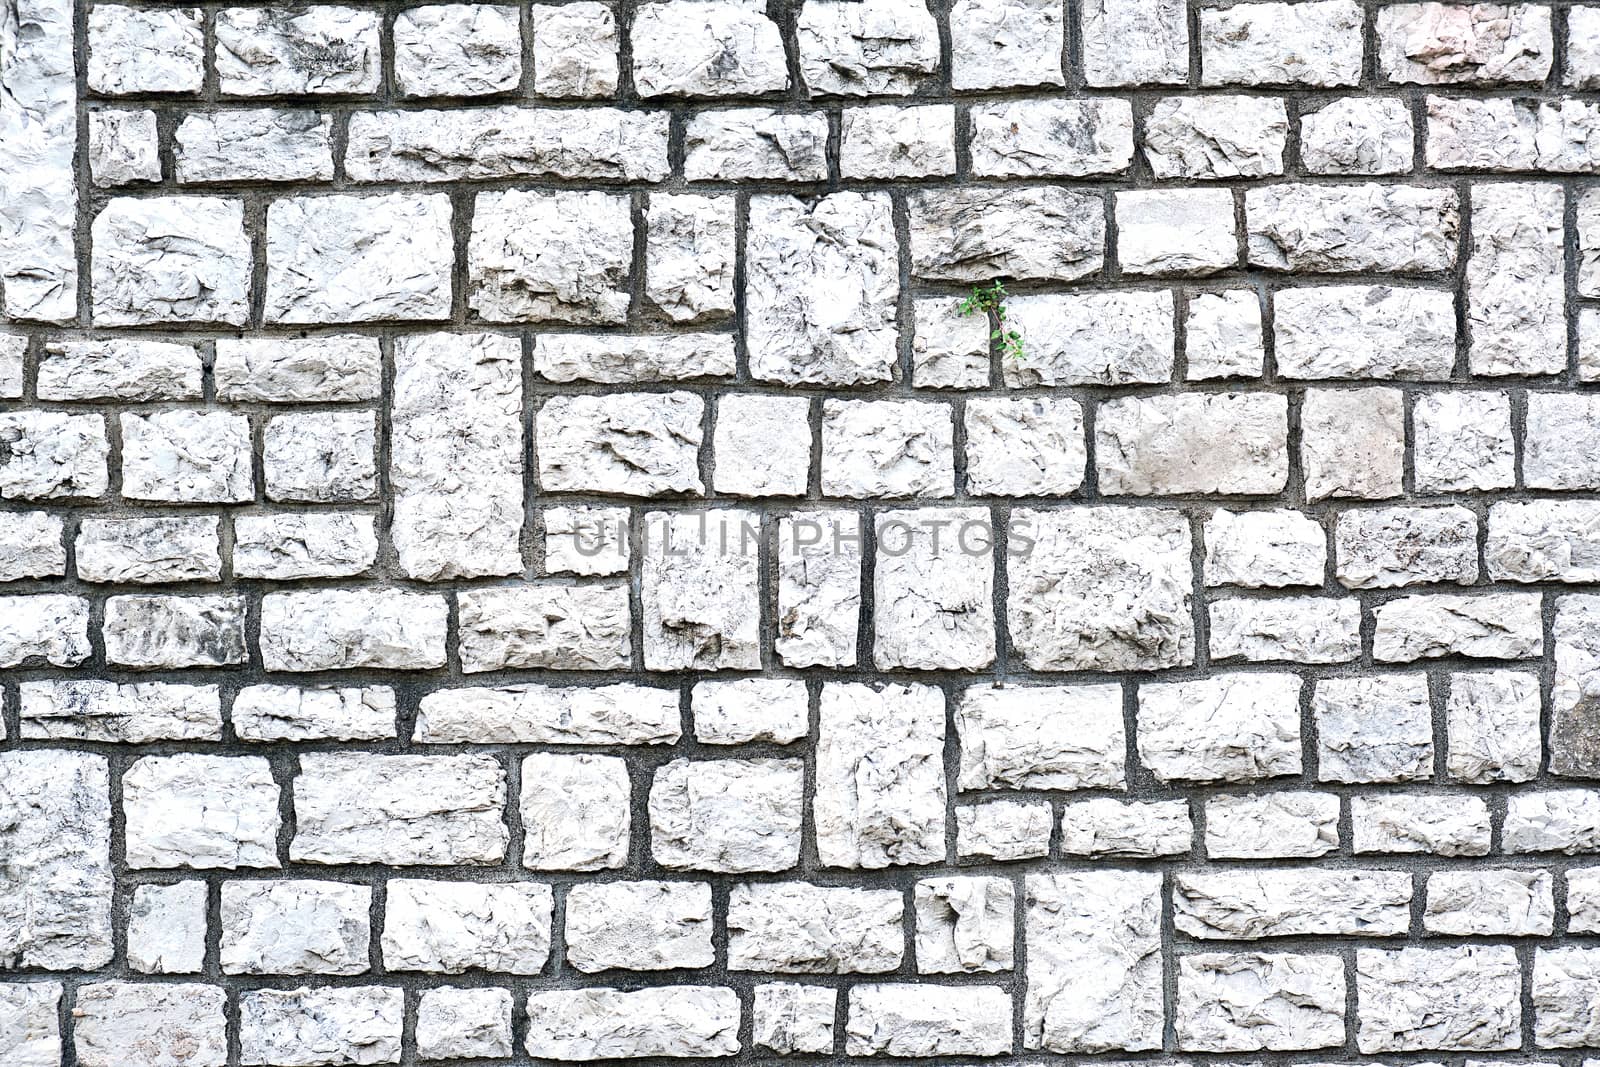 Wall made of block shaped natural stones by elxeneize